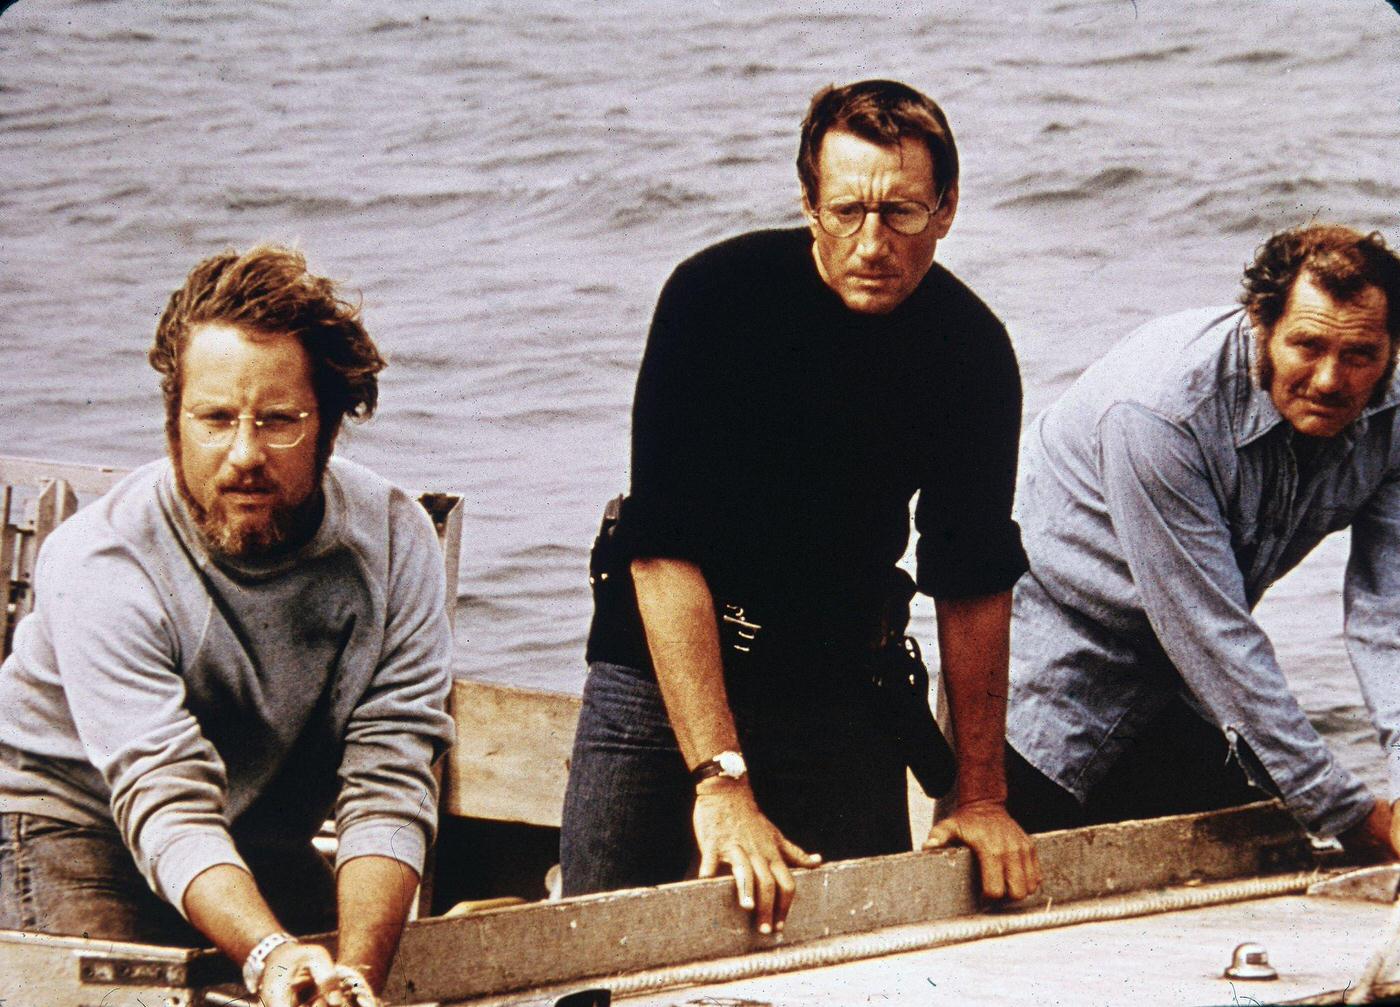 American actors Richard Dreyfuss, Roy Scheider and Robert Shaw on board a boat in a still from the film, 'Jaws,' 1975.